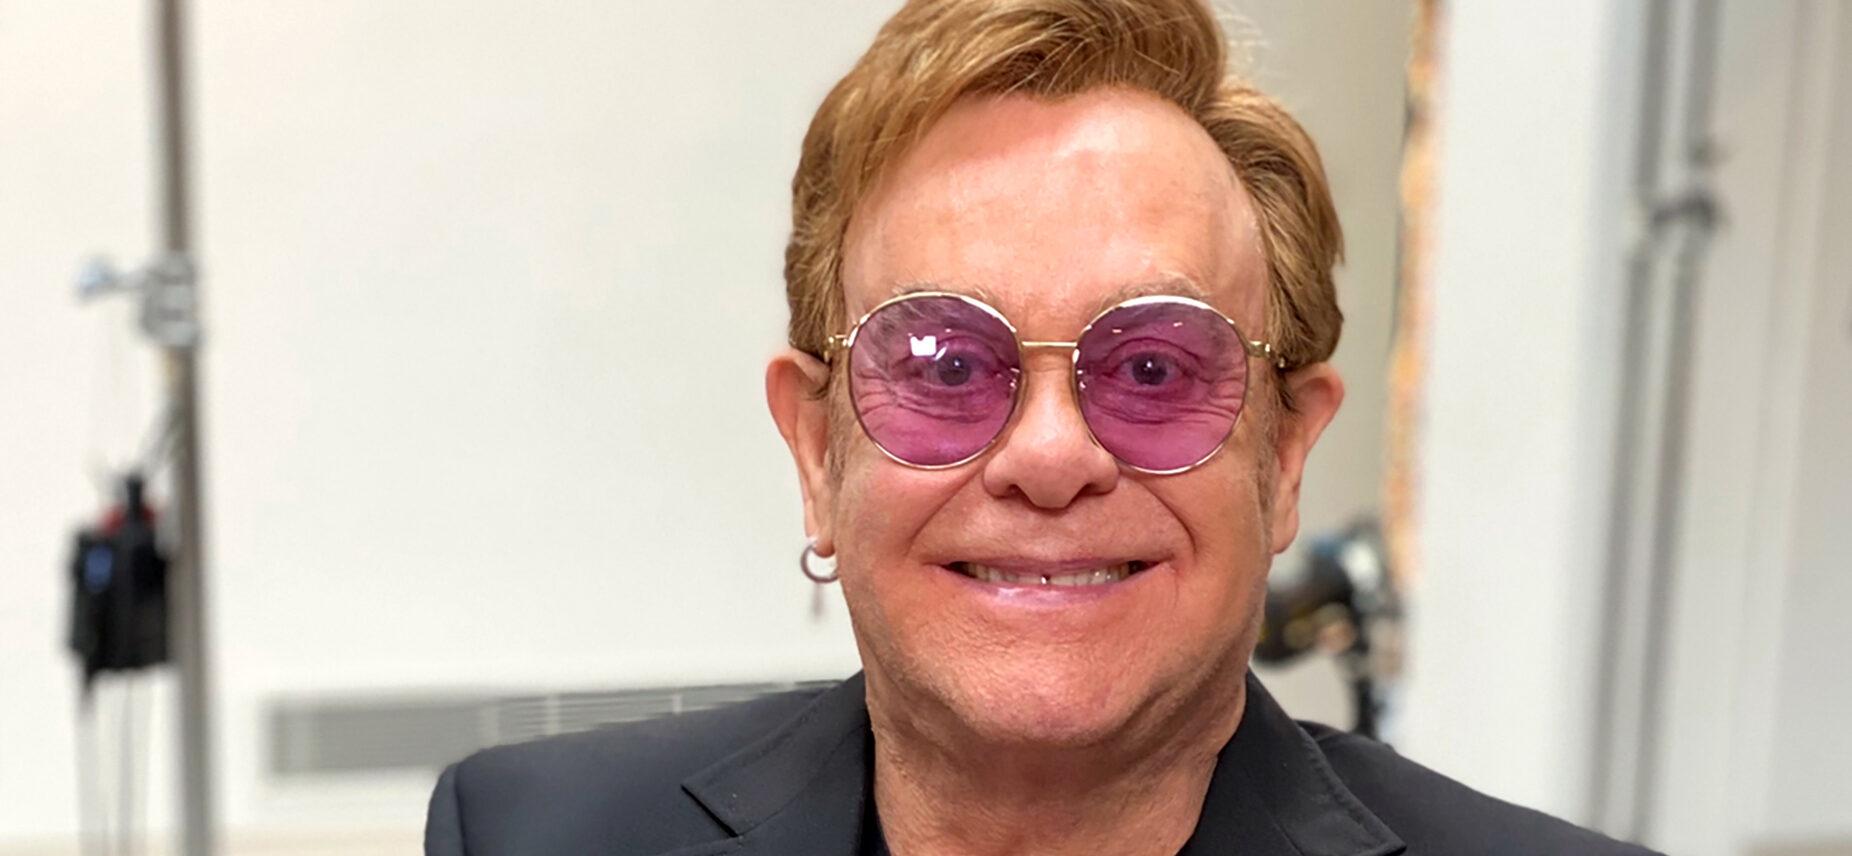 Elton John Hopes To End HIV/AIDS By 2030 As He Launches $125 Million Rocket Fund